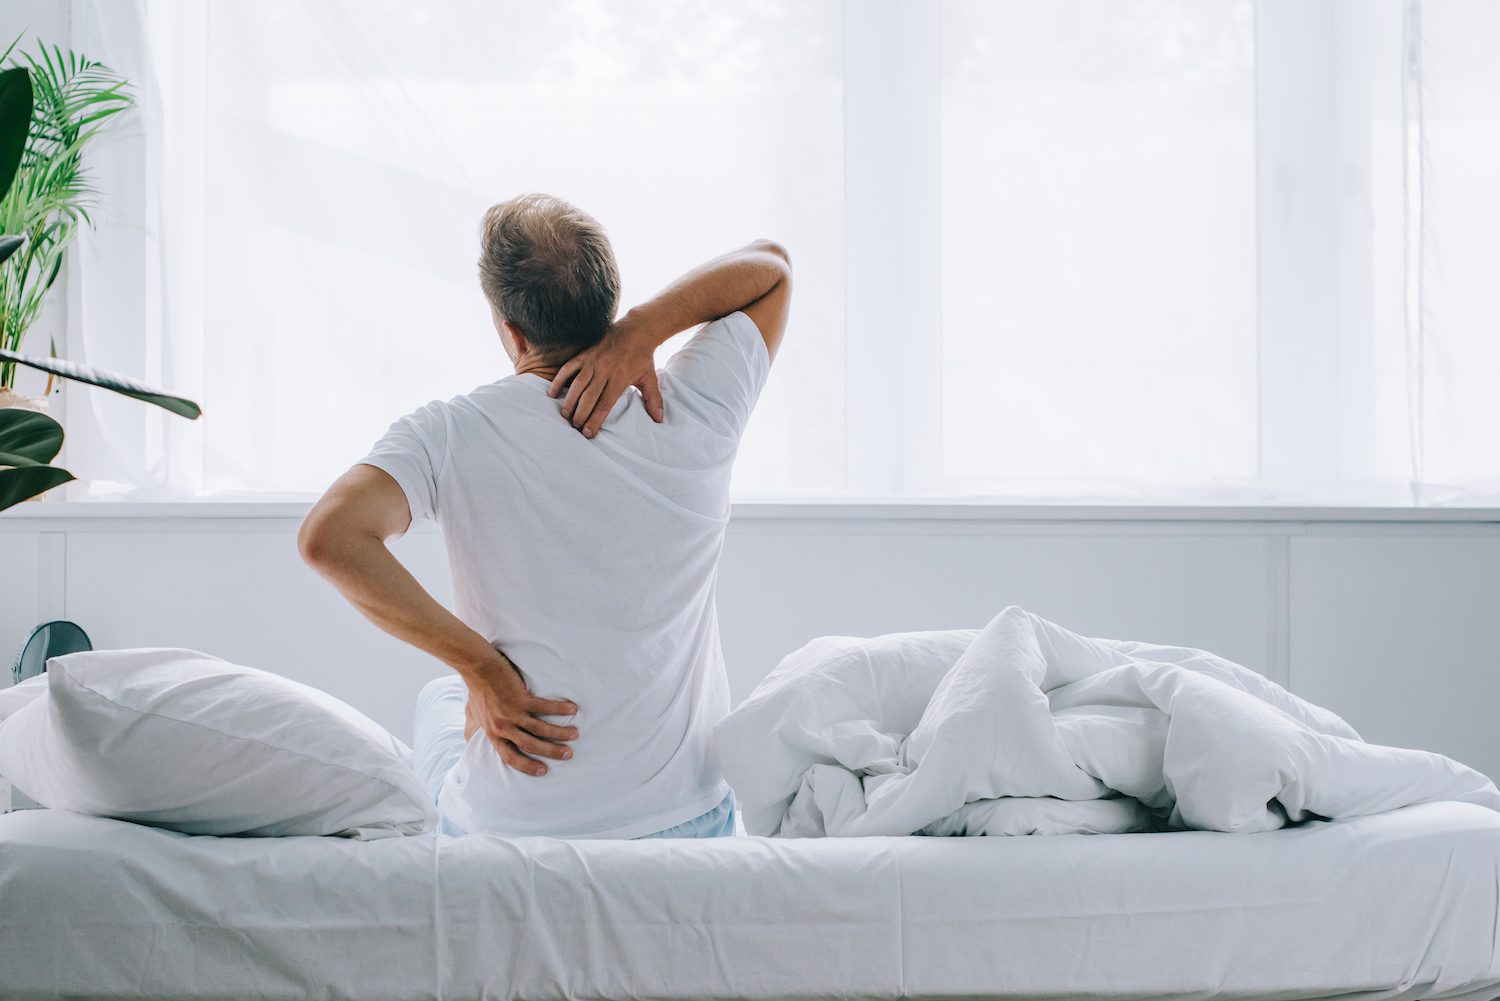 Why does my lower back hurt after waking up from sleep?